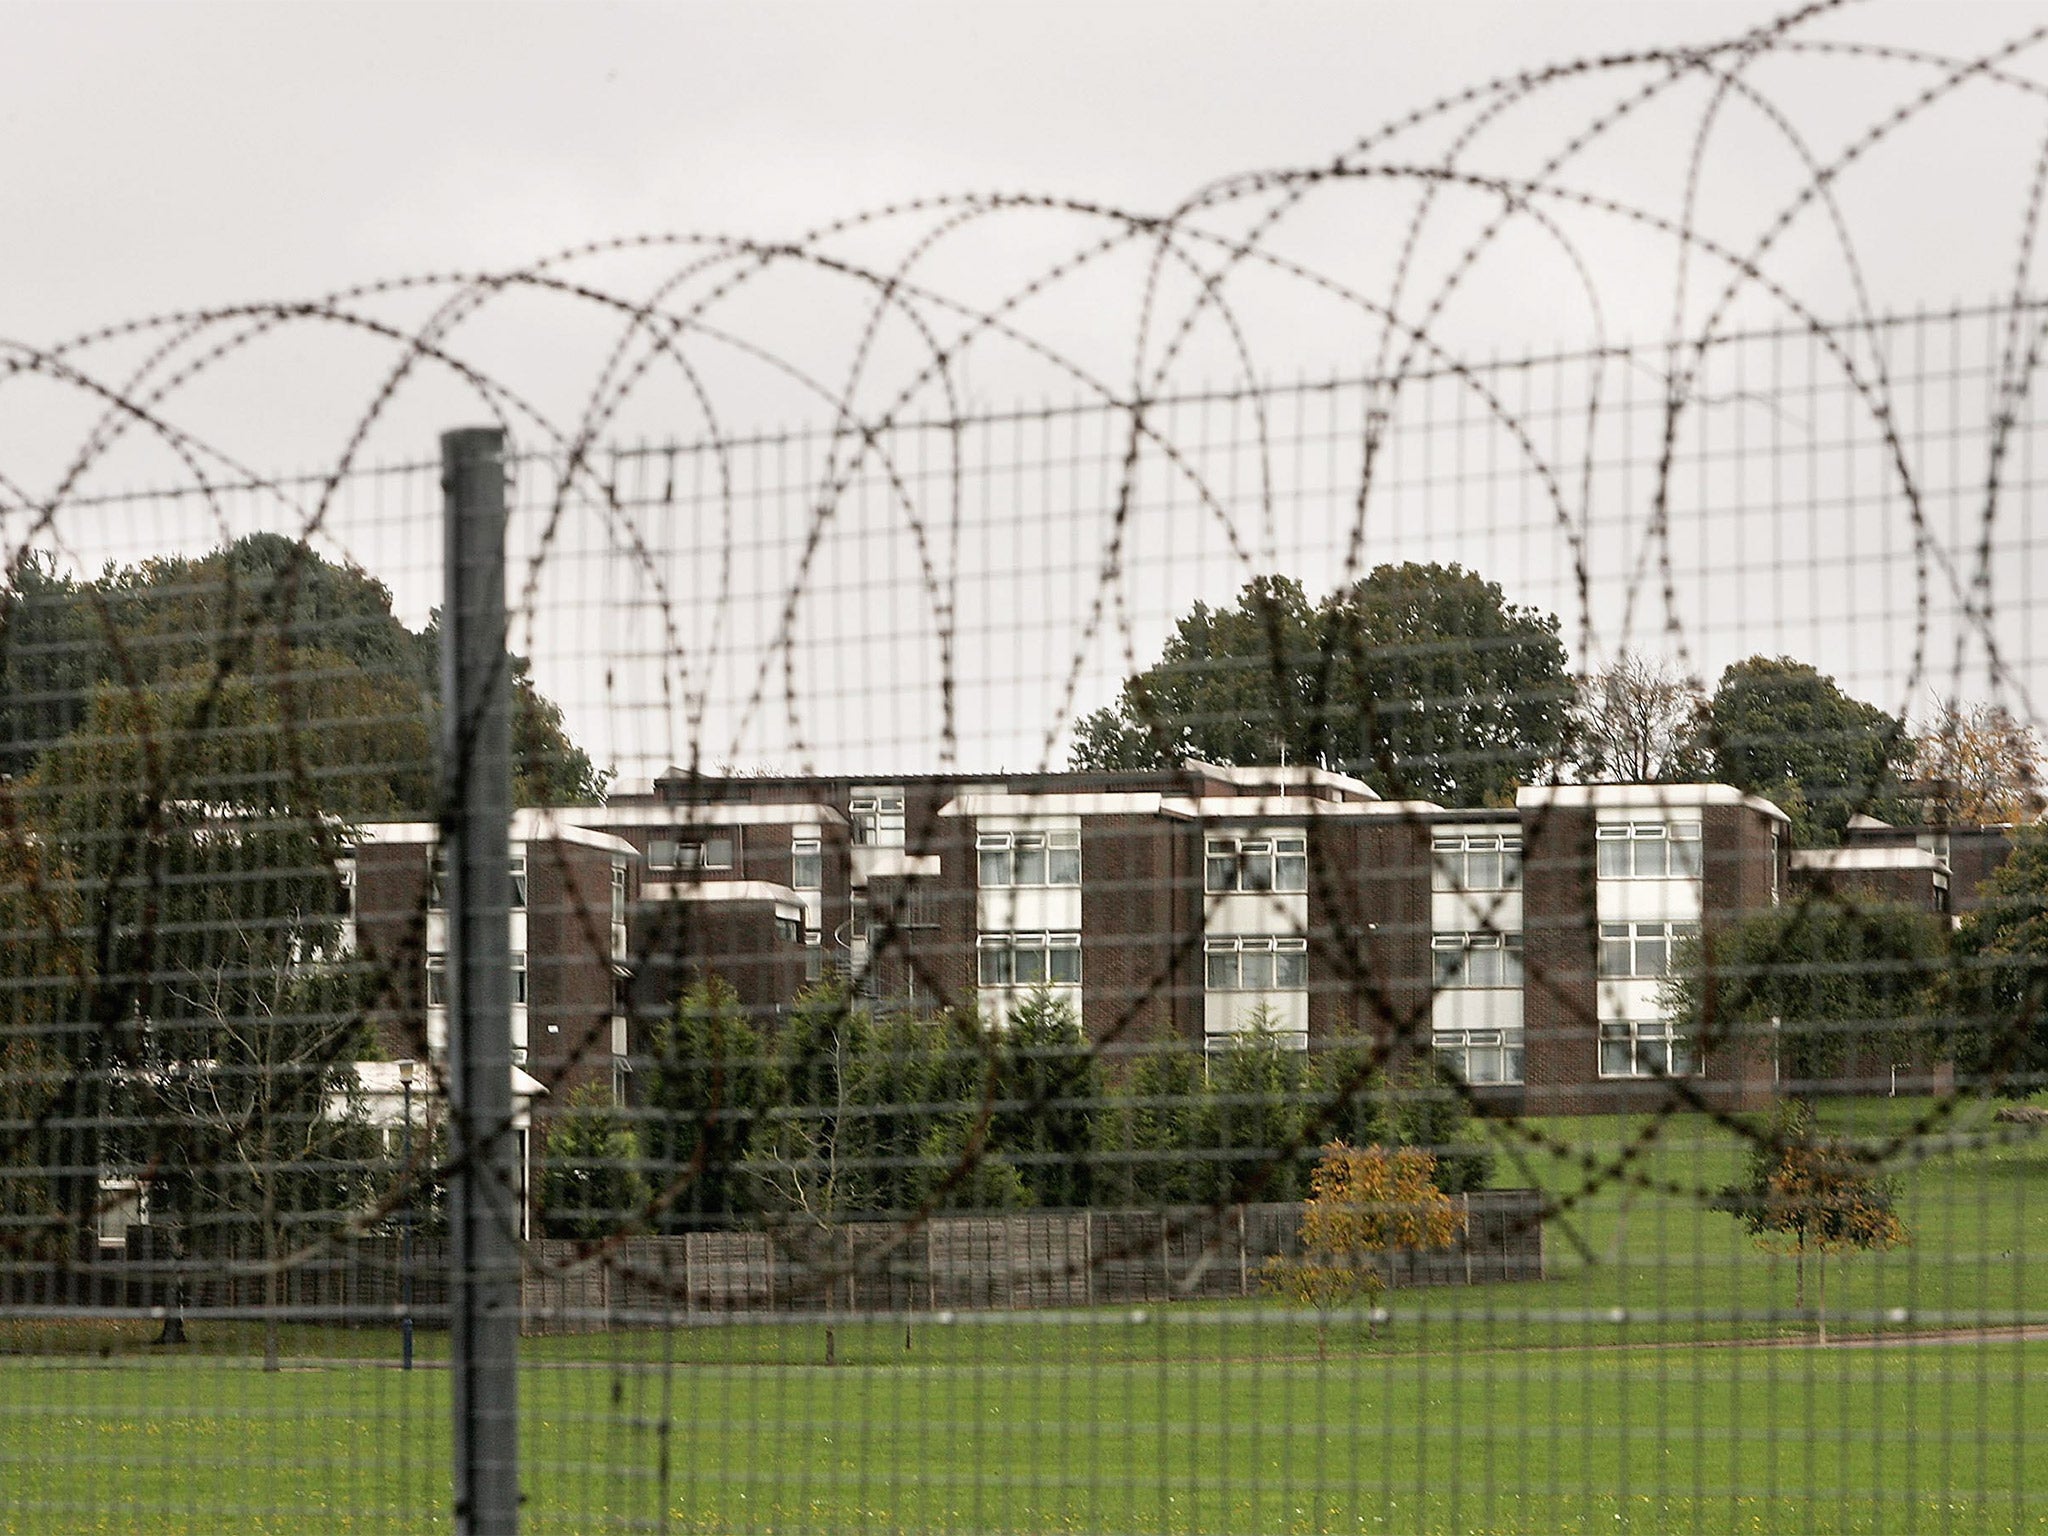 Barb wire surrounds the Defence College of Logistics at Deepcut, near Camberley